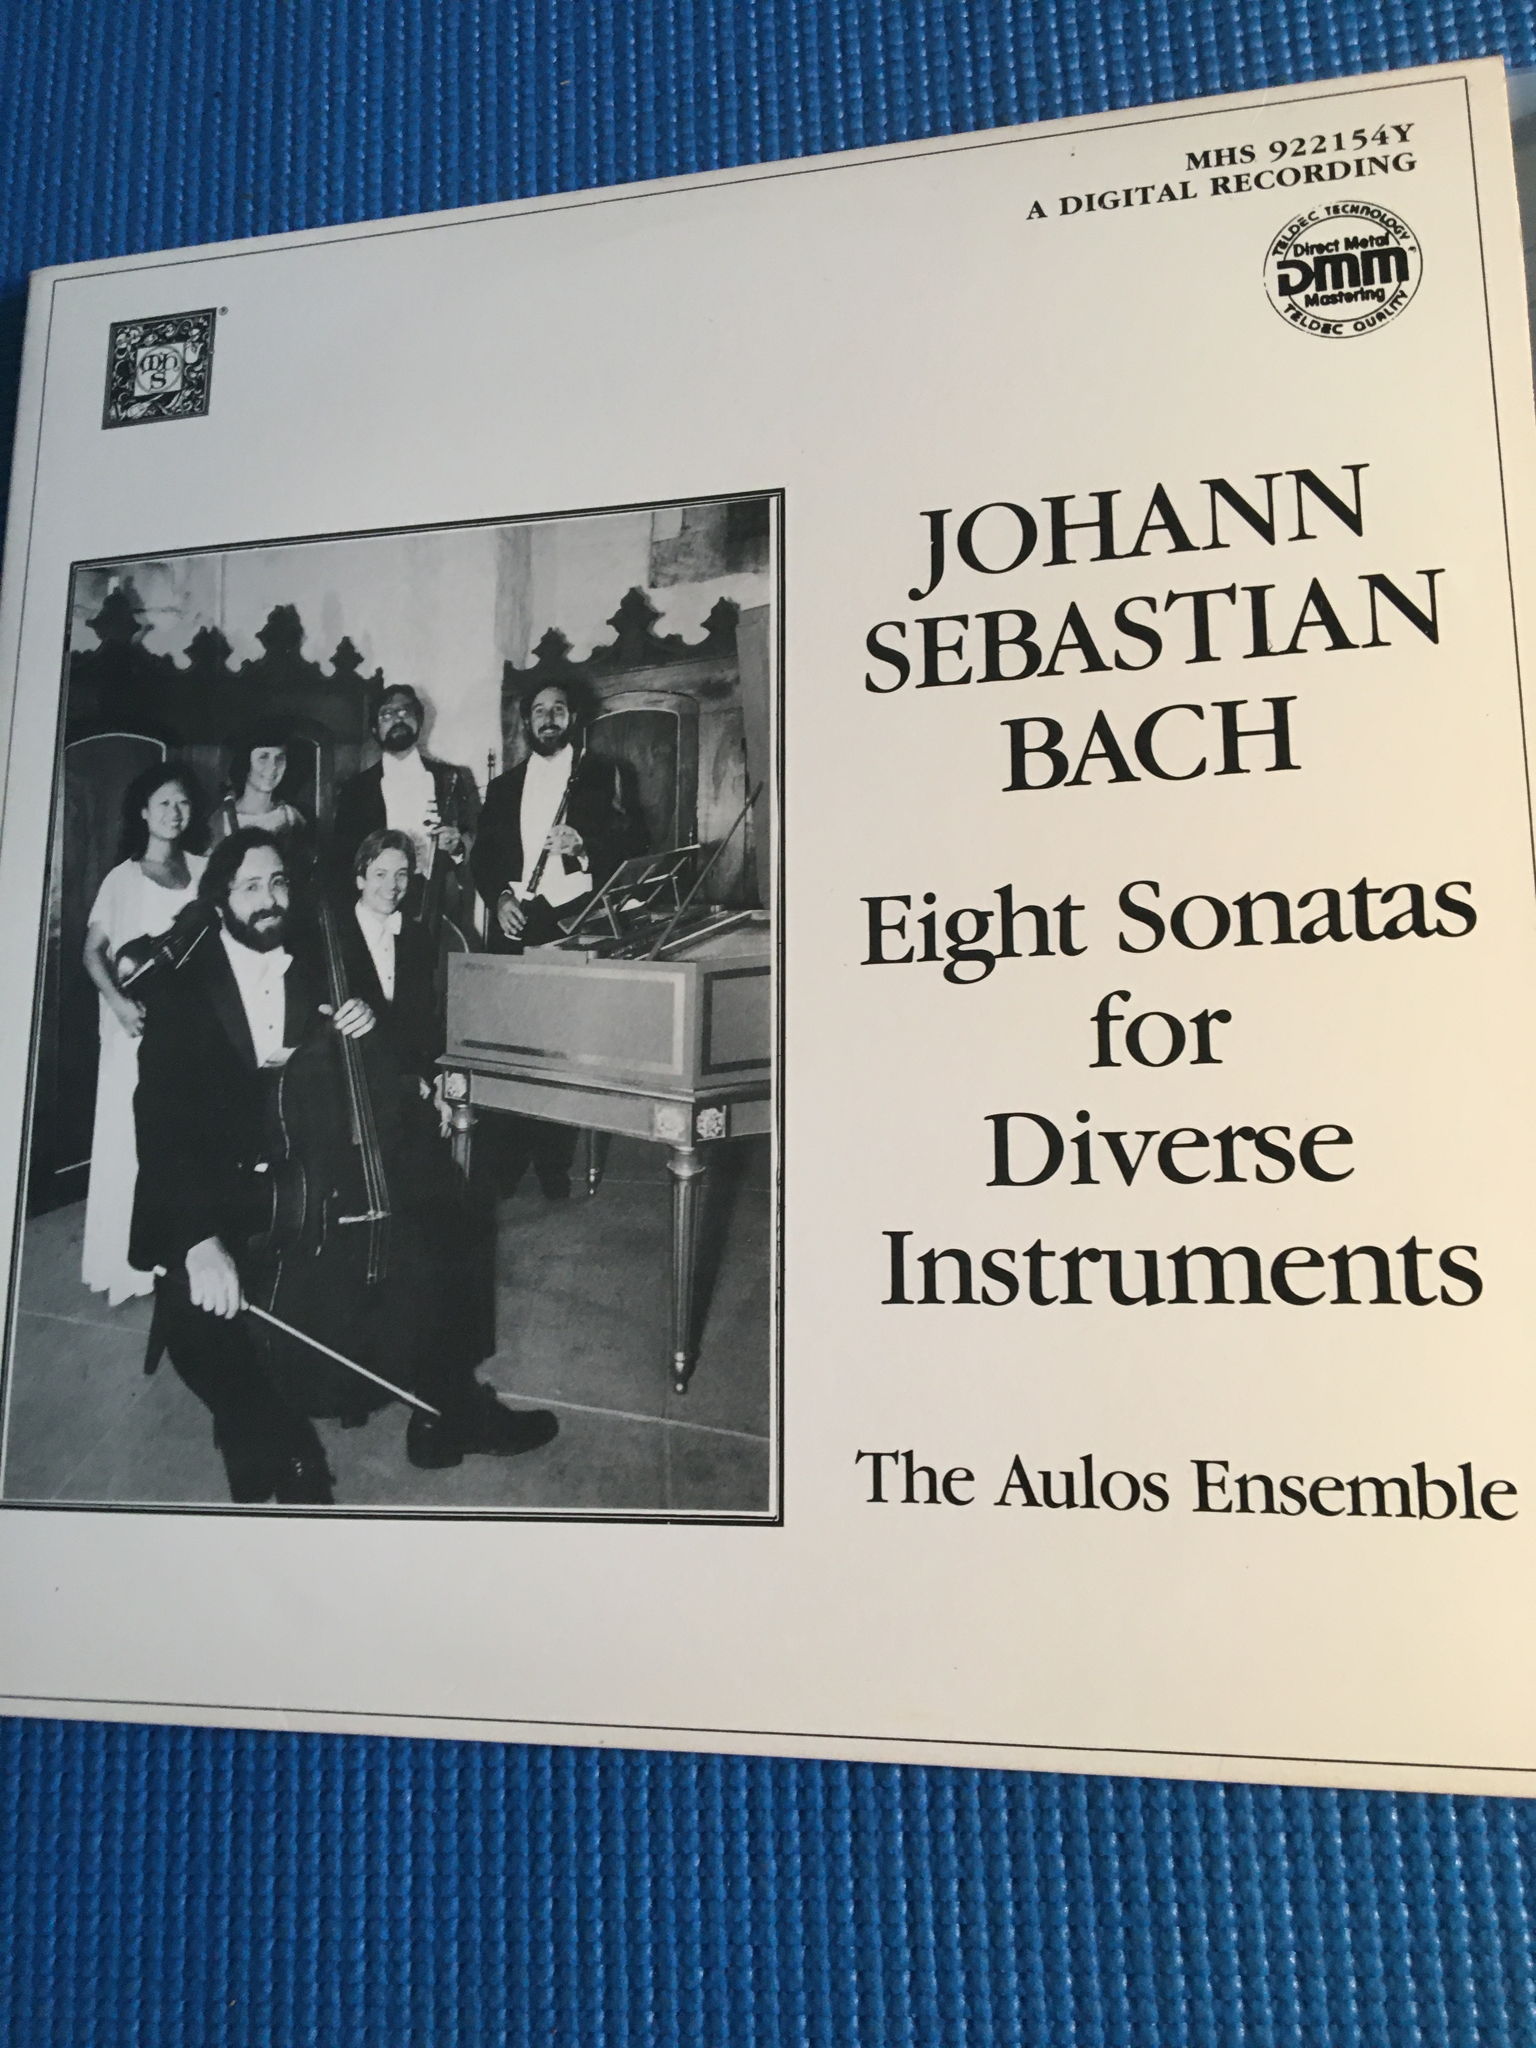 MHS 922154y DMM double Lp record Bach  The Aulos Ensemb...